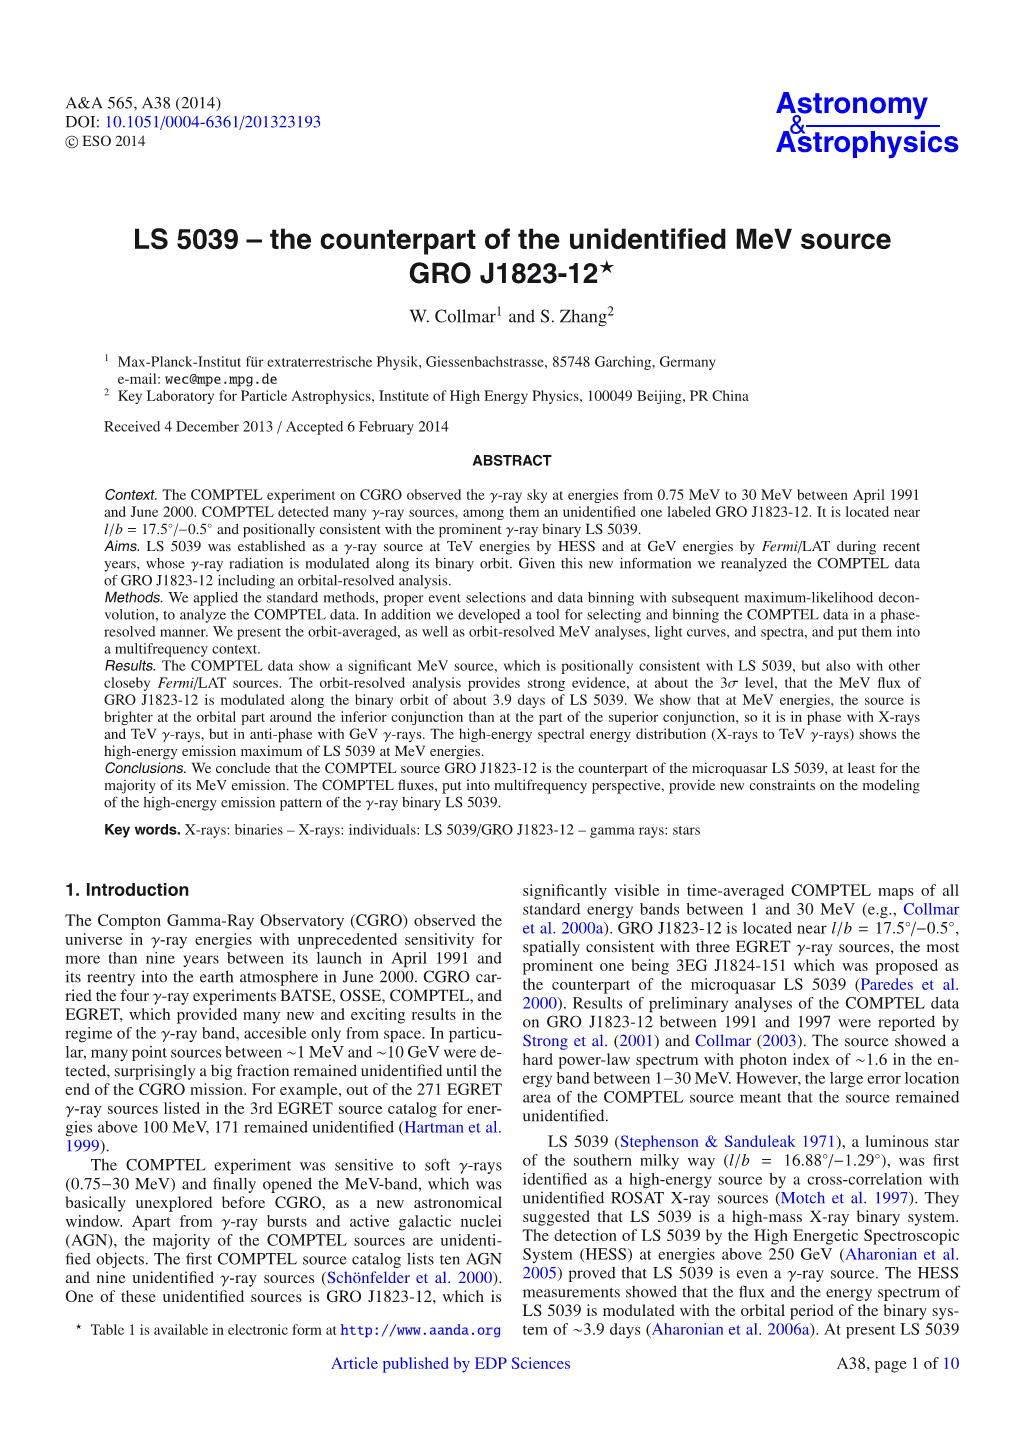 LS 5039 – the Counterpart of the Unidentiﬁed Mev Source GRO J1823-12